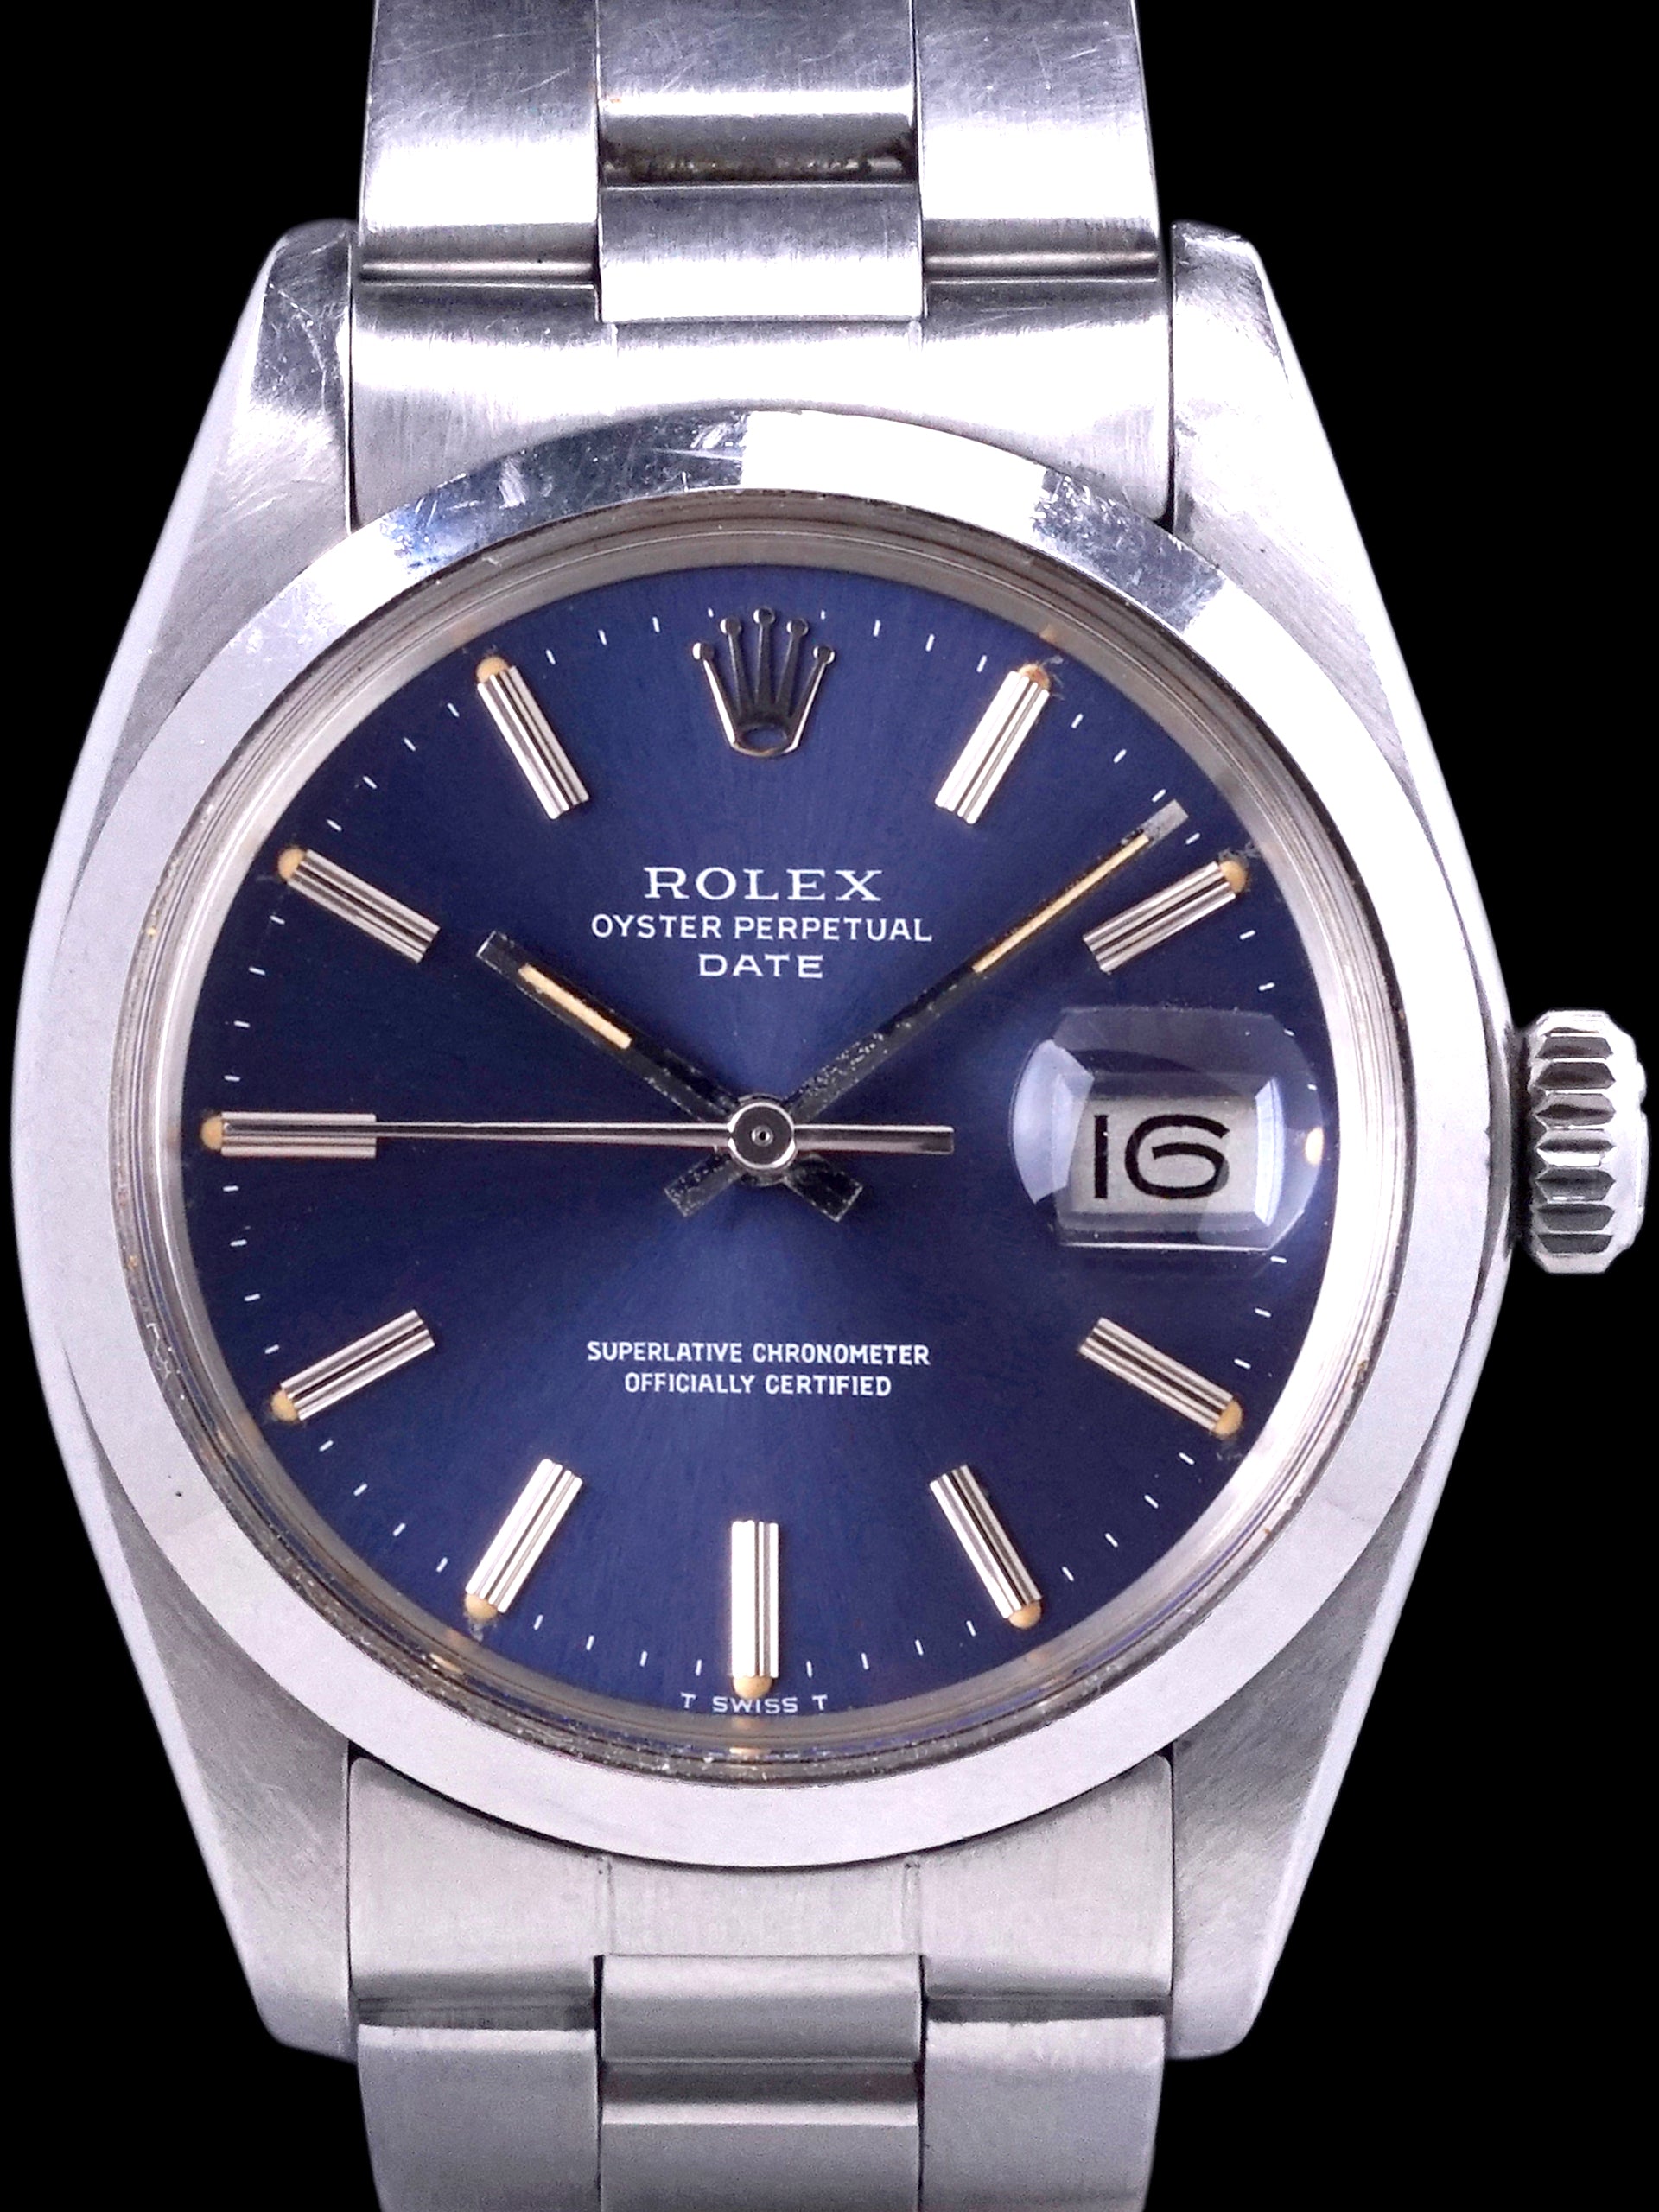 *Unpolished* 1976 Rolex Oyster-Perpetual Date (Ref. 1500) "Blue Dial"